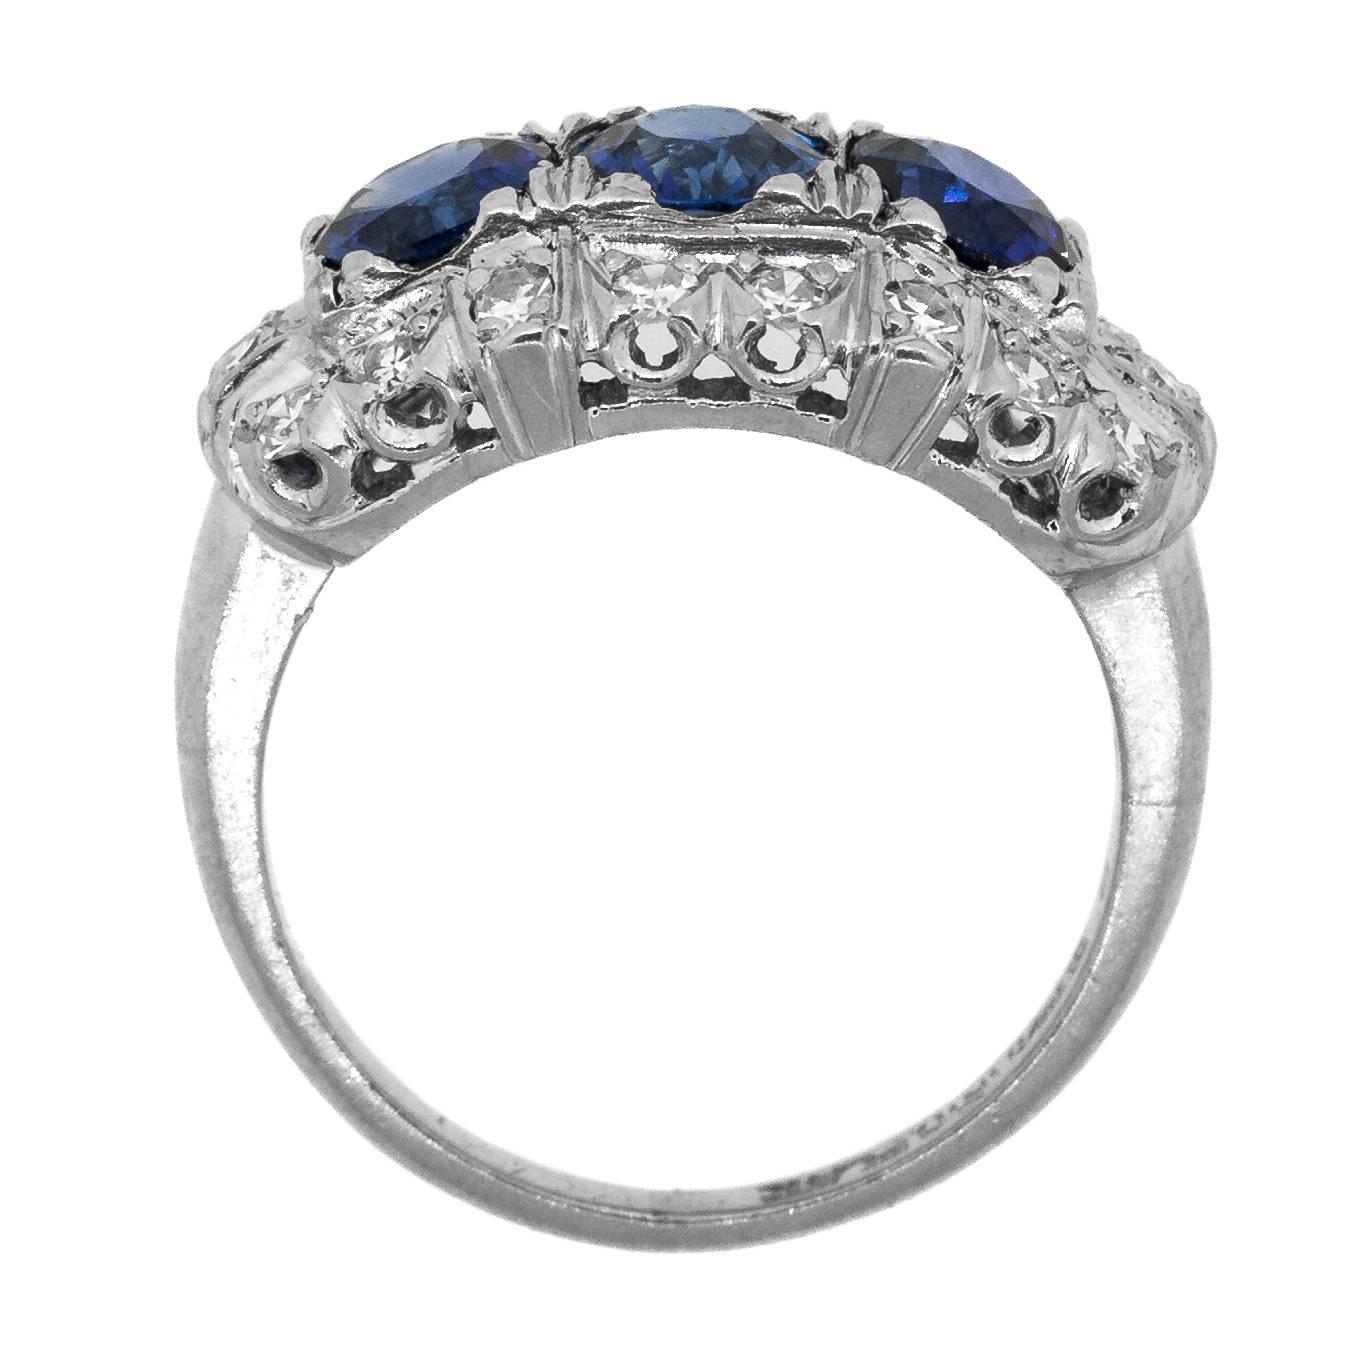 Gorgeous three stone Ceylon Sapphire of incandescent blue Ring surrounded by eighteen Single Cut Diamonds of H/I color – VS/SI clarity all set in a hand engraved platinum setting.  Ring size 6. Circa 1940’s.

SKU:  R2087